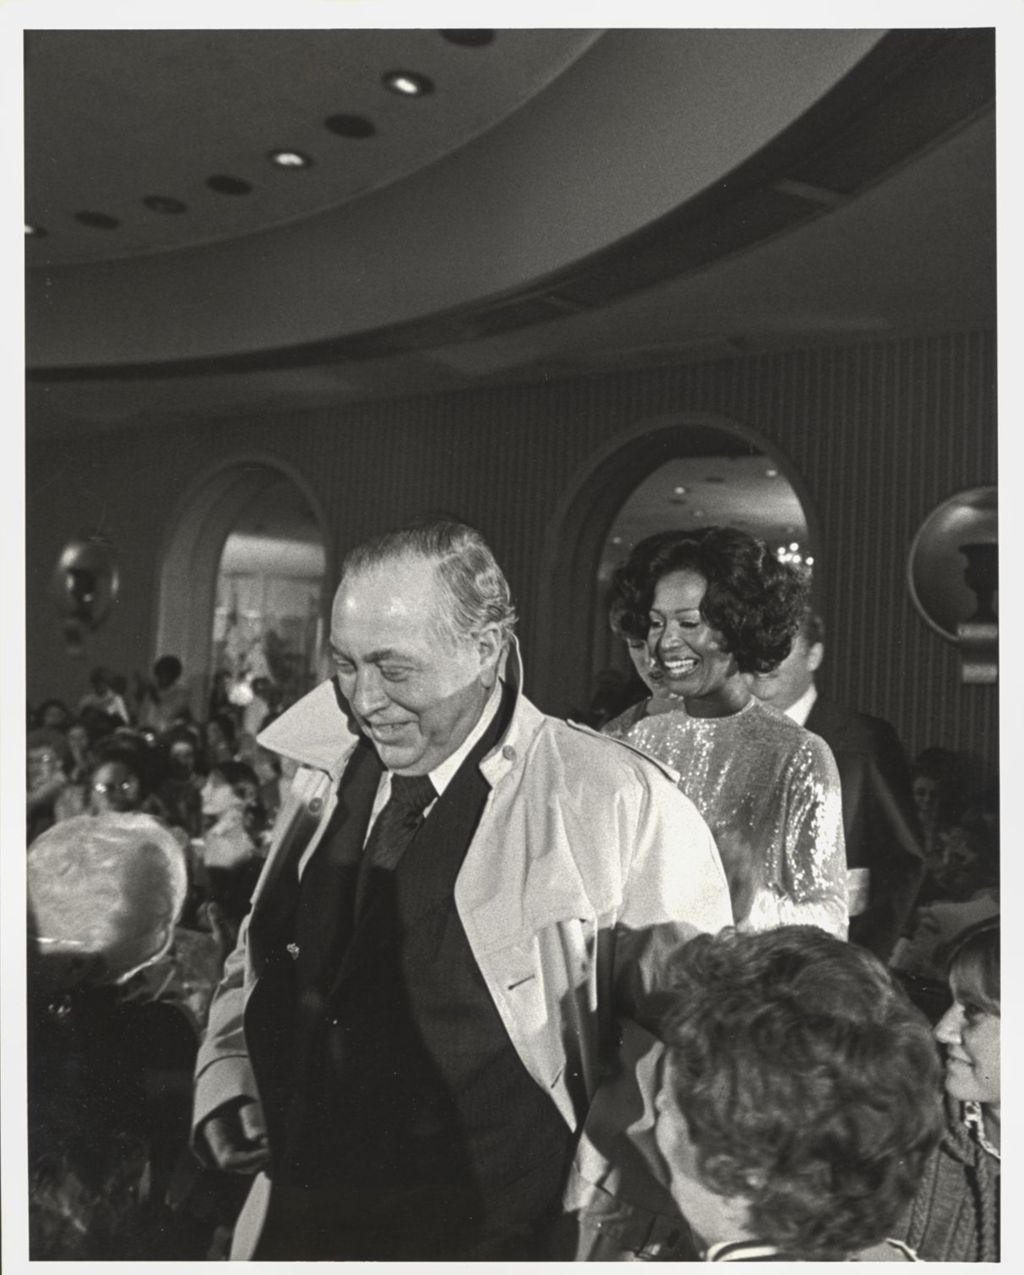 Miniature of Richard J. Daley at a fashion show event